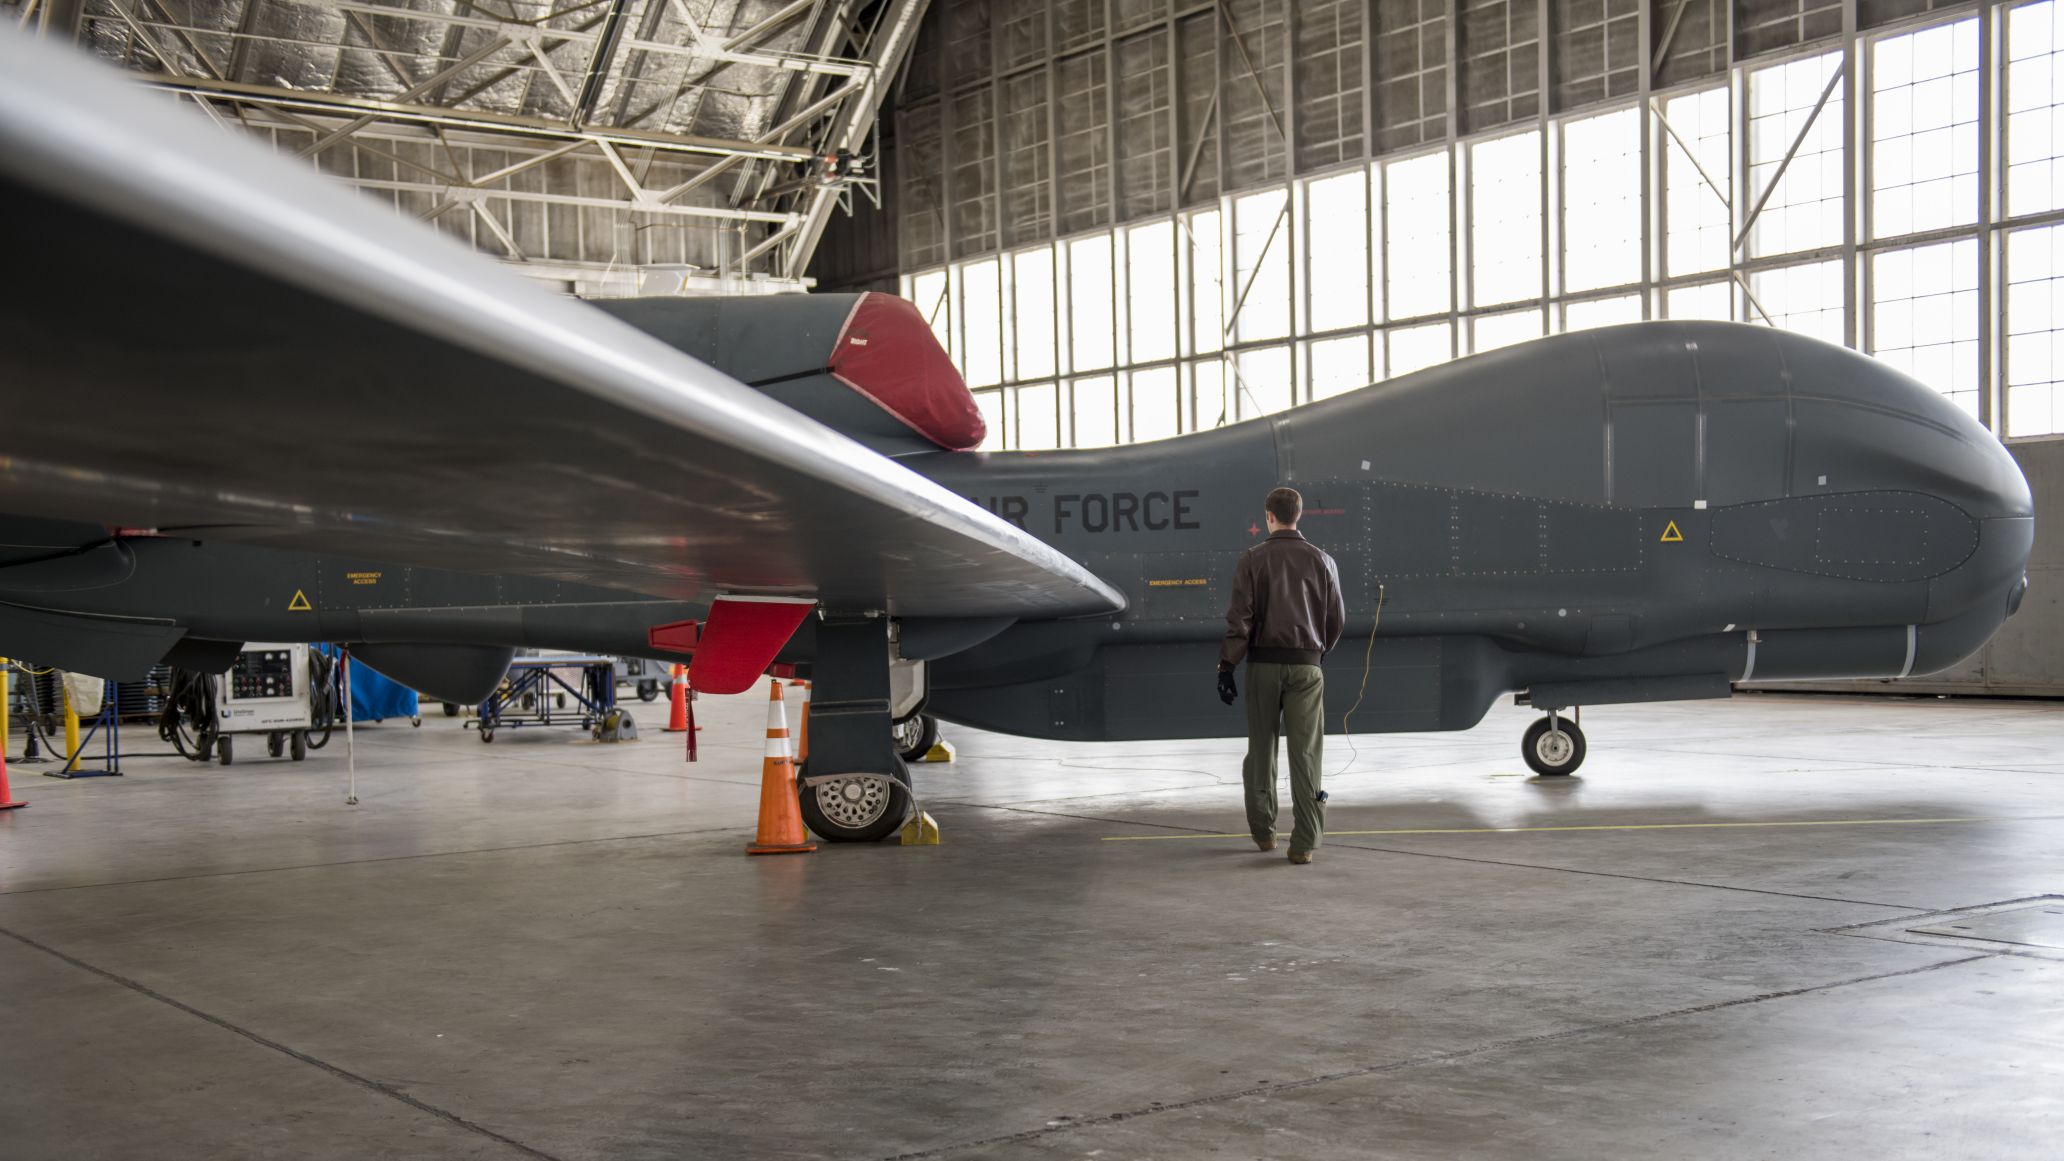 A US Air Force airman on a walk-through inspection of an RQ-4 Global Hawk UAV on 6 April 2020. A new report proposes the US use existing UAVs such as the Global Hawk to better perform ISR missions to help deter aggression by China and Russia. (US Air Force)